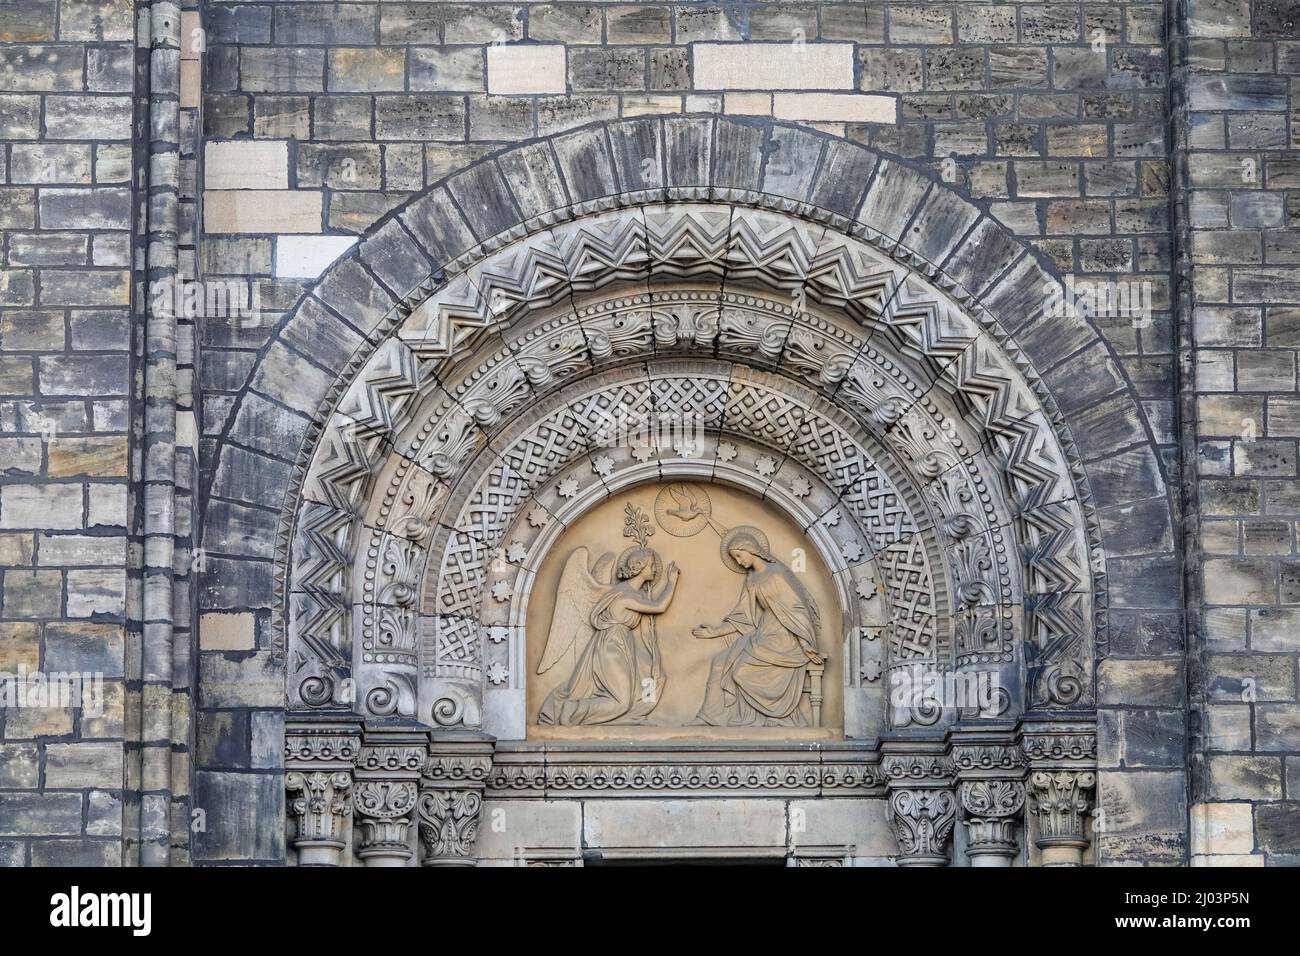 Relief with the Virgin Mary and the angel. Neo-romanesque portal of old Saint Cyril and Methodius Church in Karlin, Prague, Czech Republic.  Stock Photo